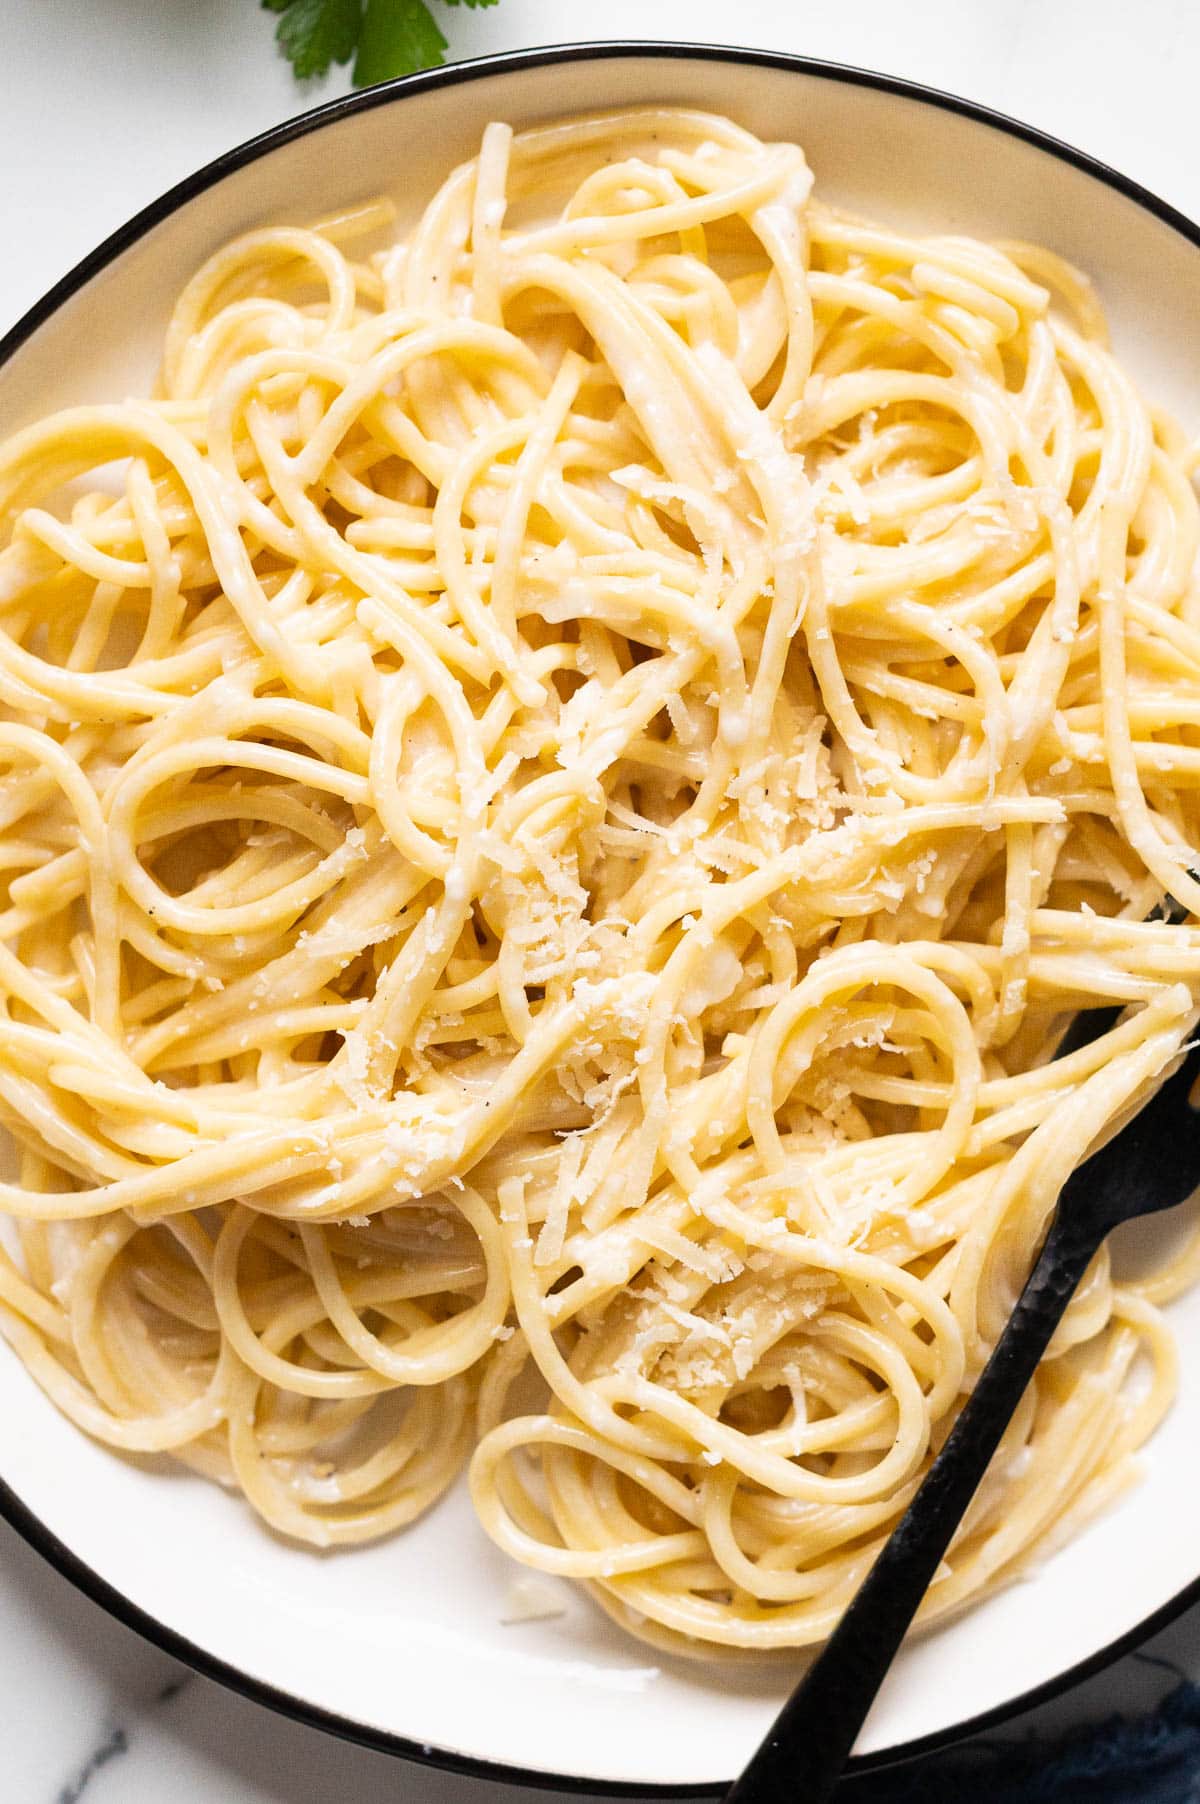 Spaghetti with healthier alfredo sauce and parmesan cheese on a plate.